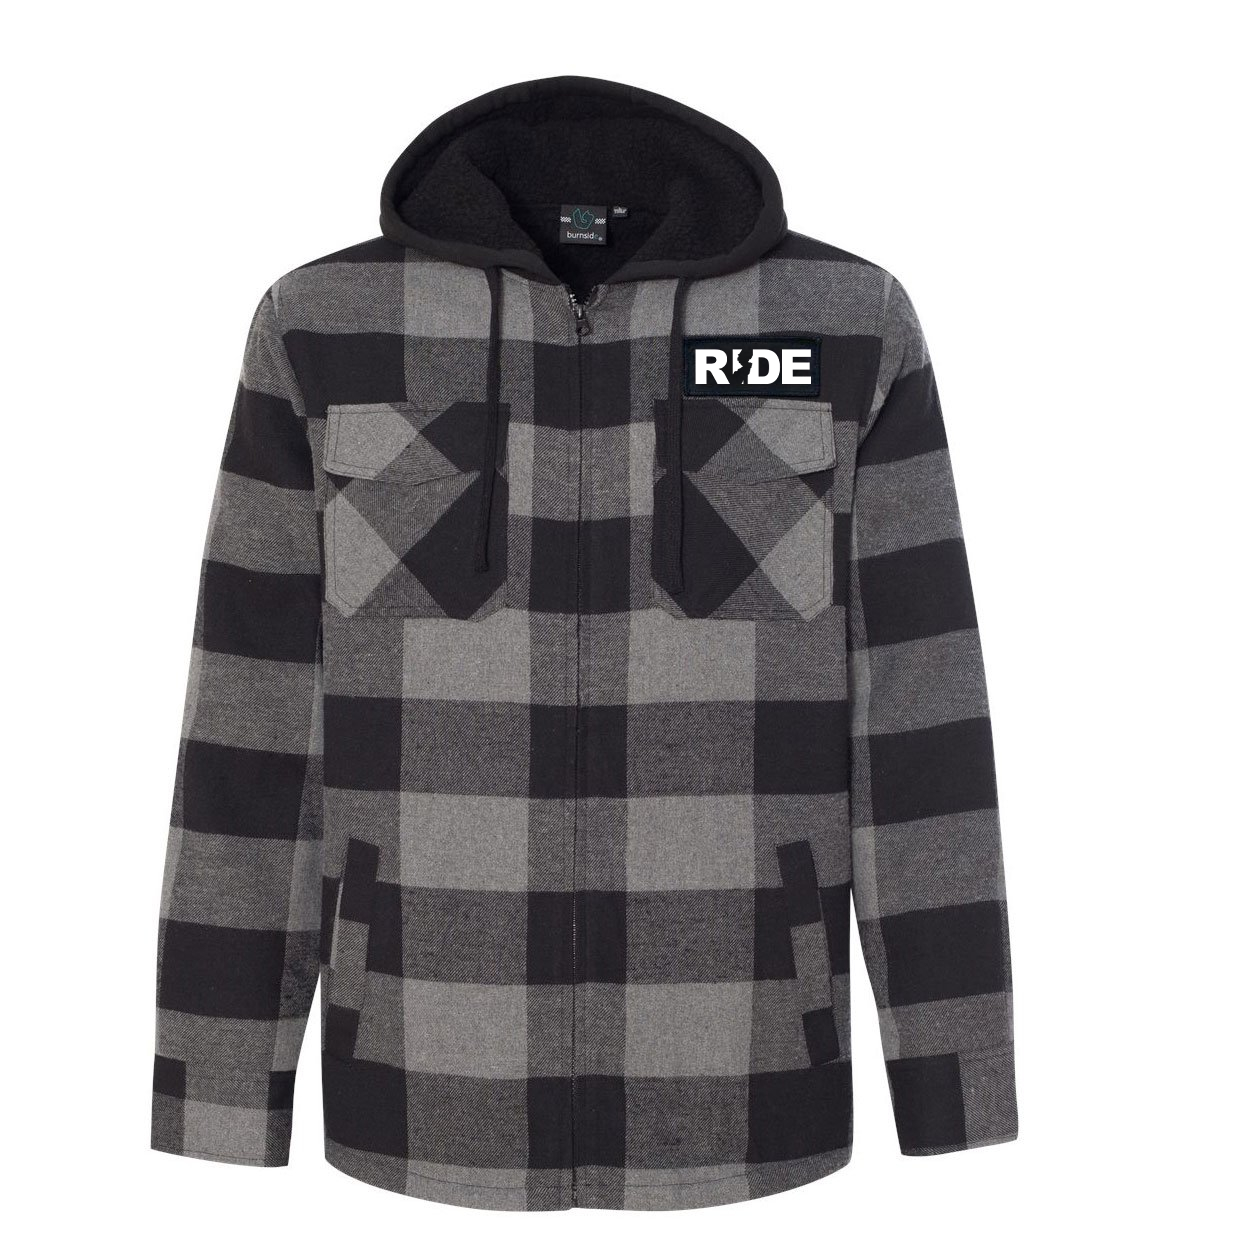 Ride New Jersey Classic Unisex Full Zip Woven Patch Hooded Flannel Jacket Black/Gray (White Logo)